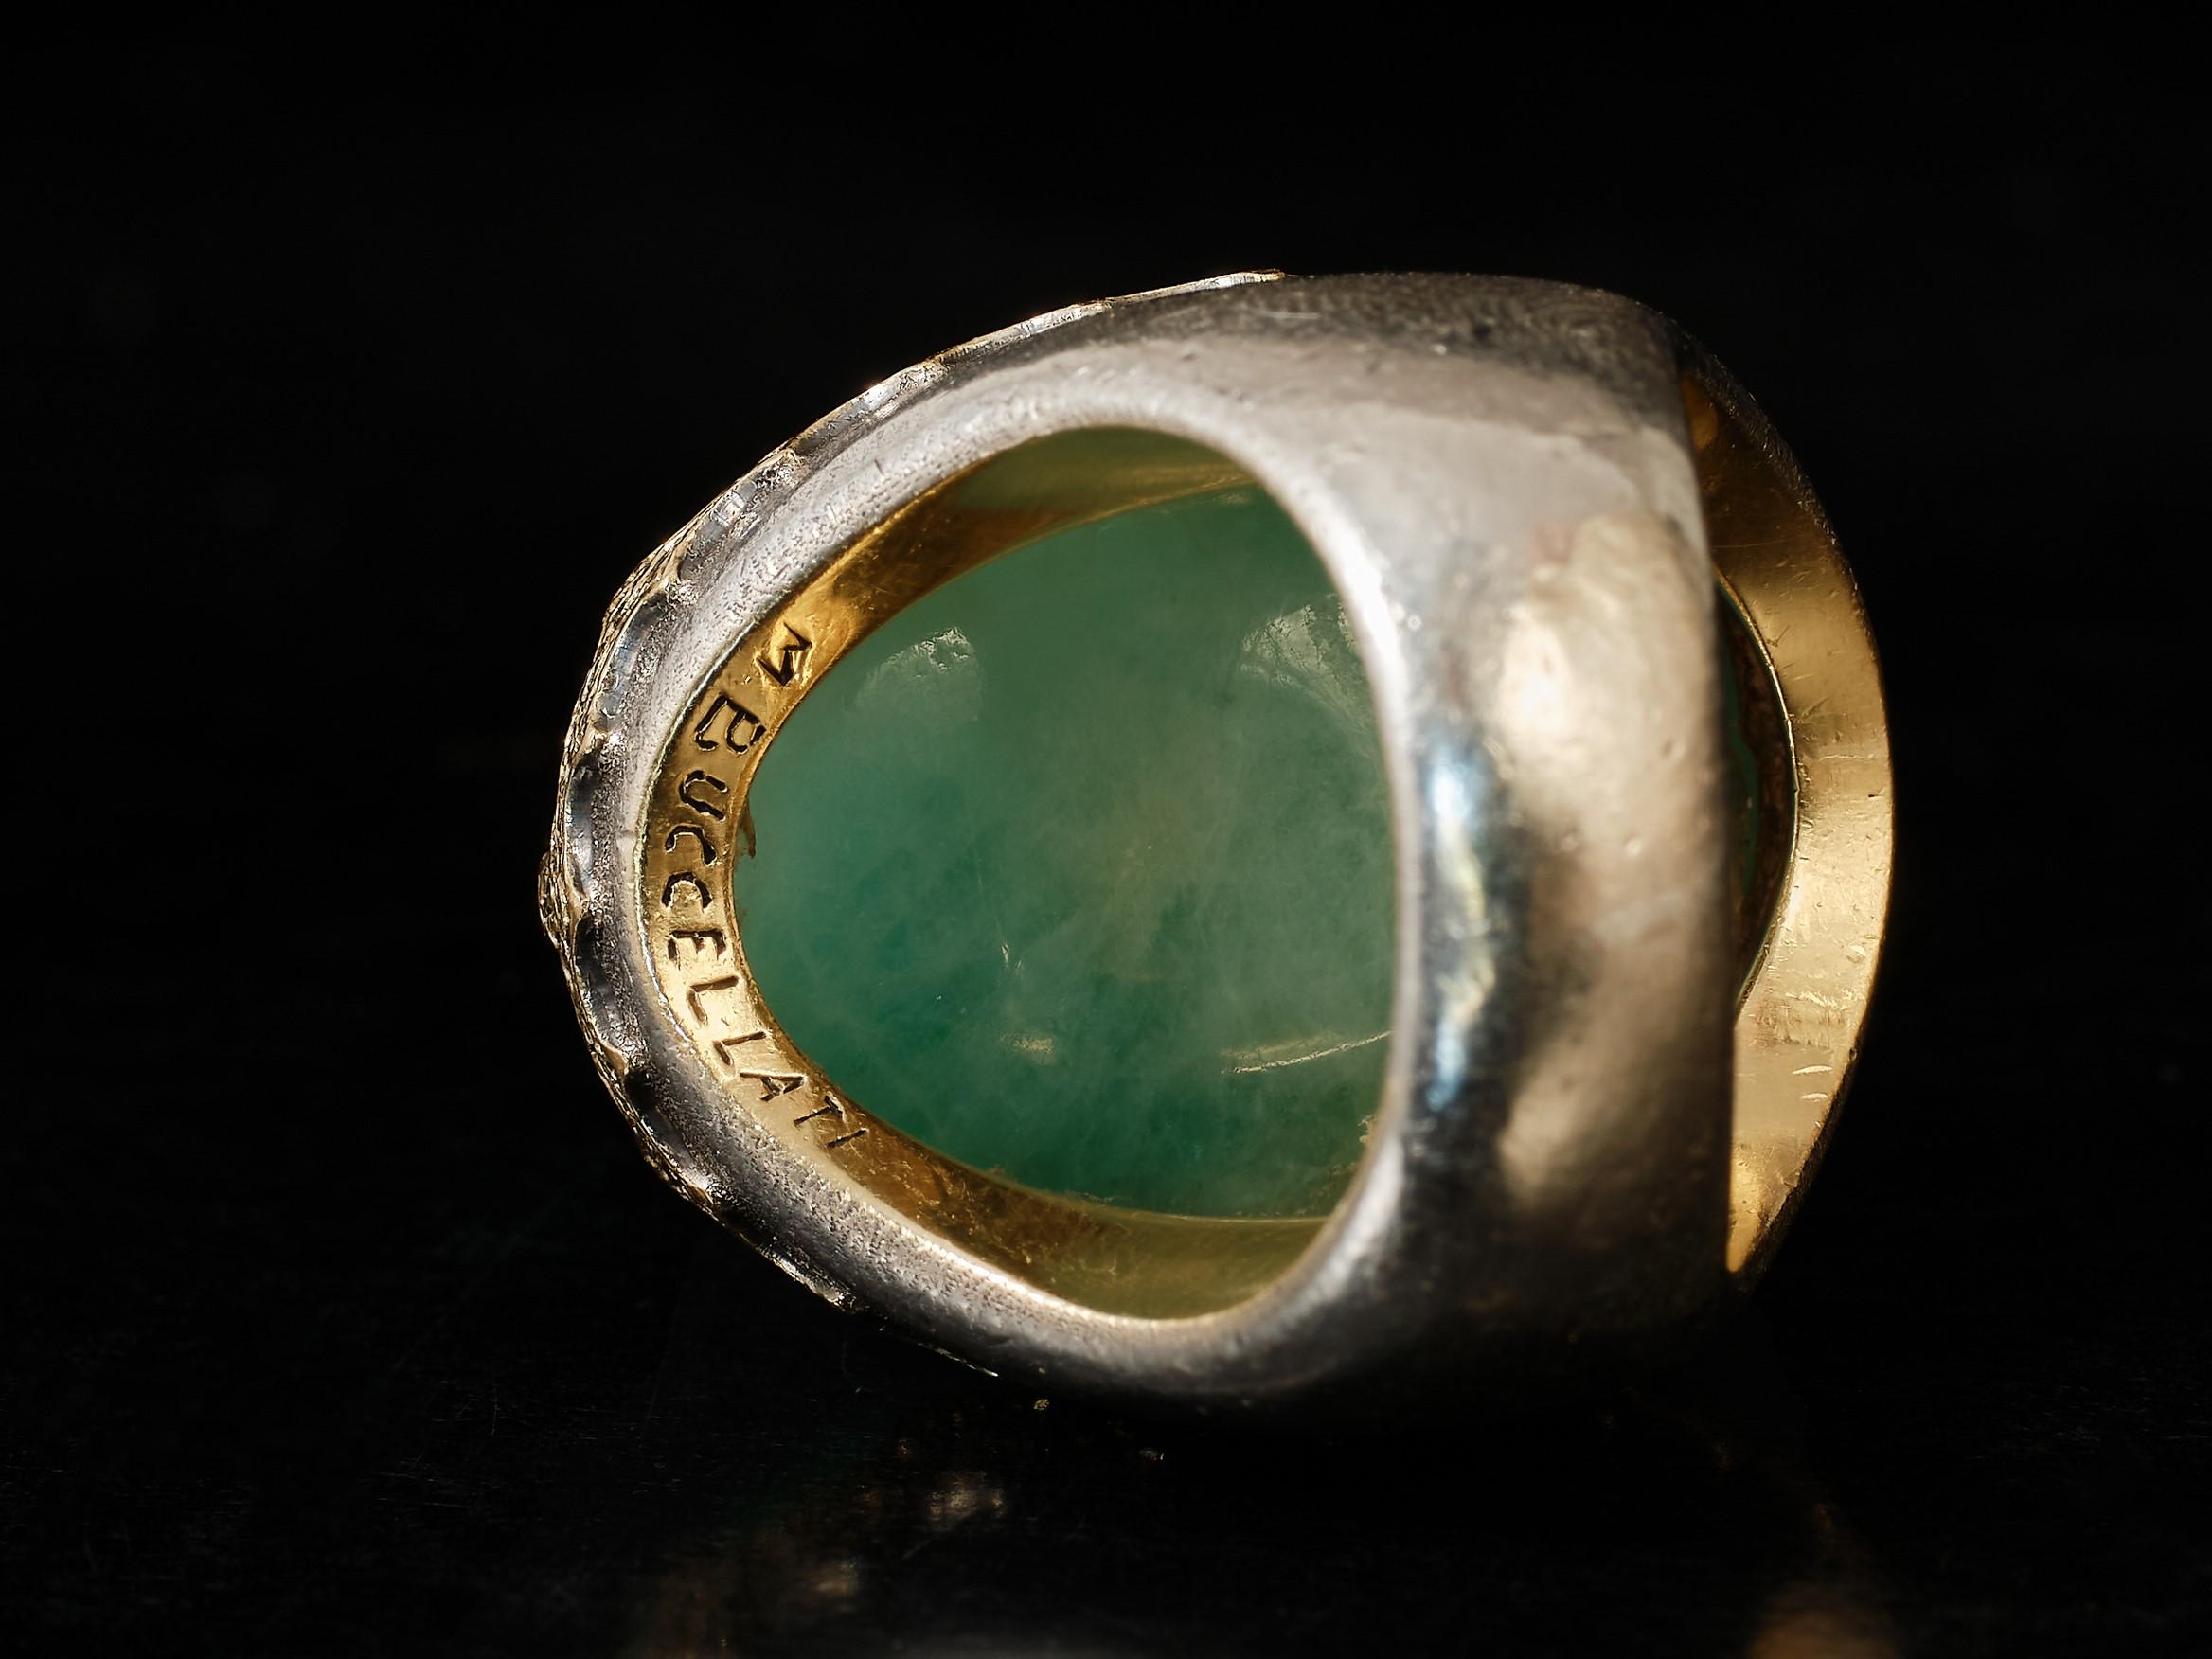 Cabochon Vintage 1960s Mario Buccellati ring with 39 carat jade nephrite For Sale